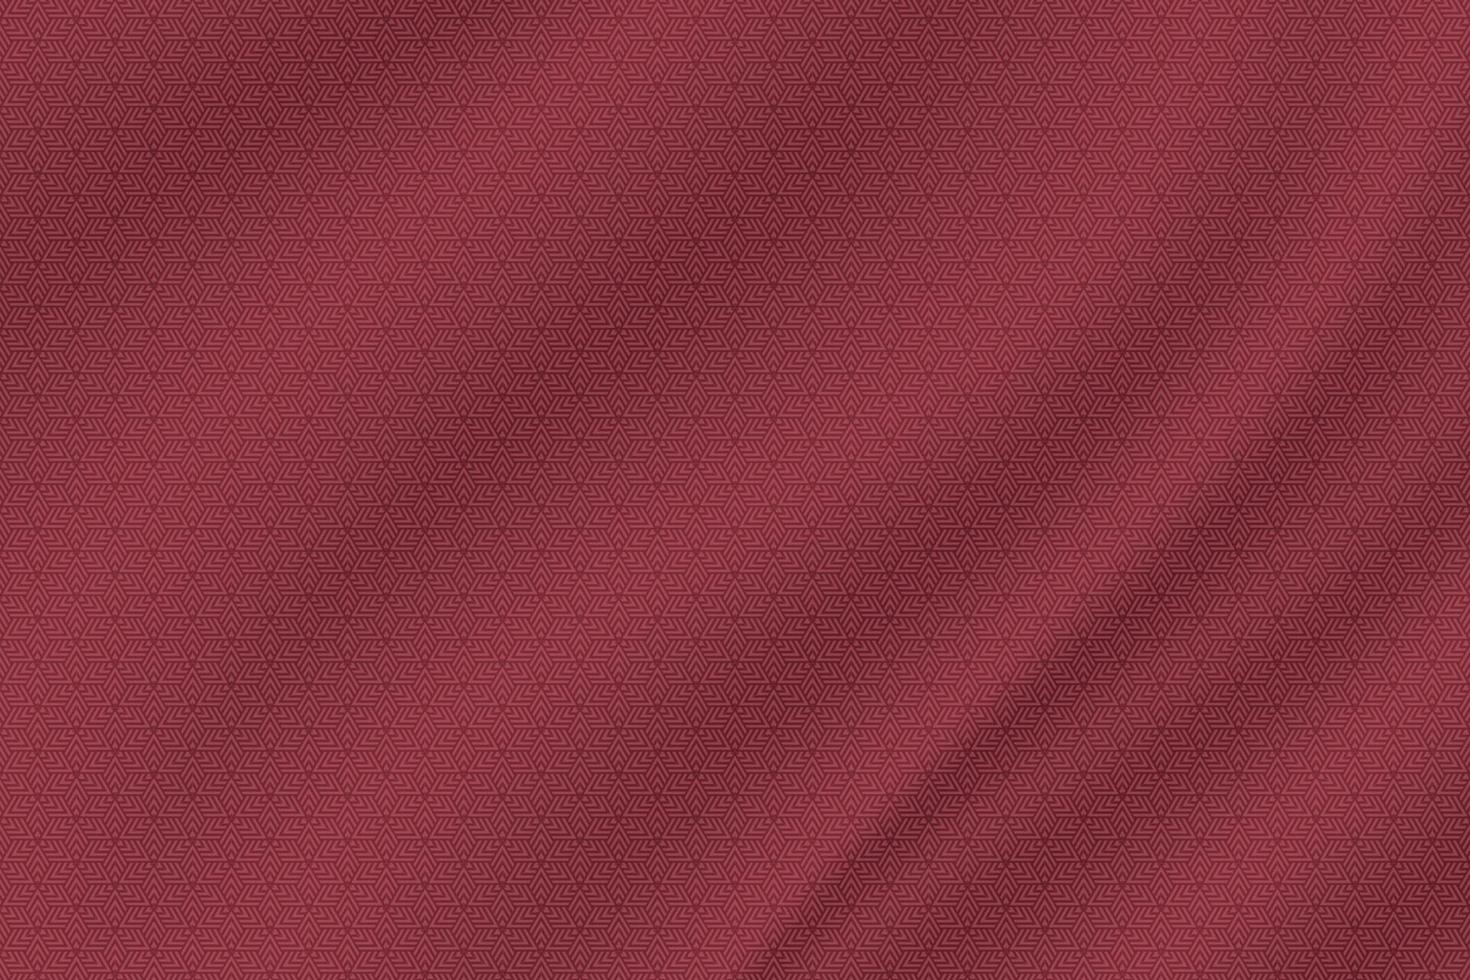 https://static.vecteezy.com/system/resources/previews/002/445/343/non_2x/geometric-seamless-pattern-traditional-design-with-smooth-silk-texture-free-vector.jpg